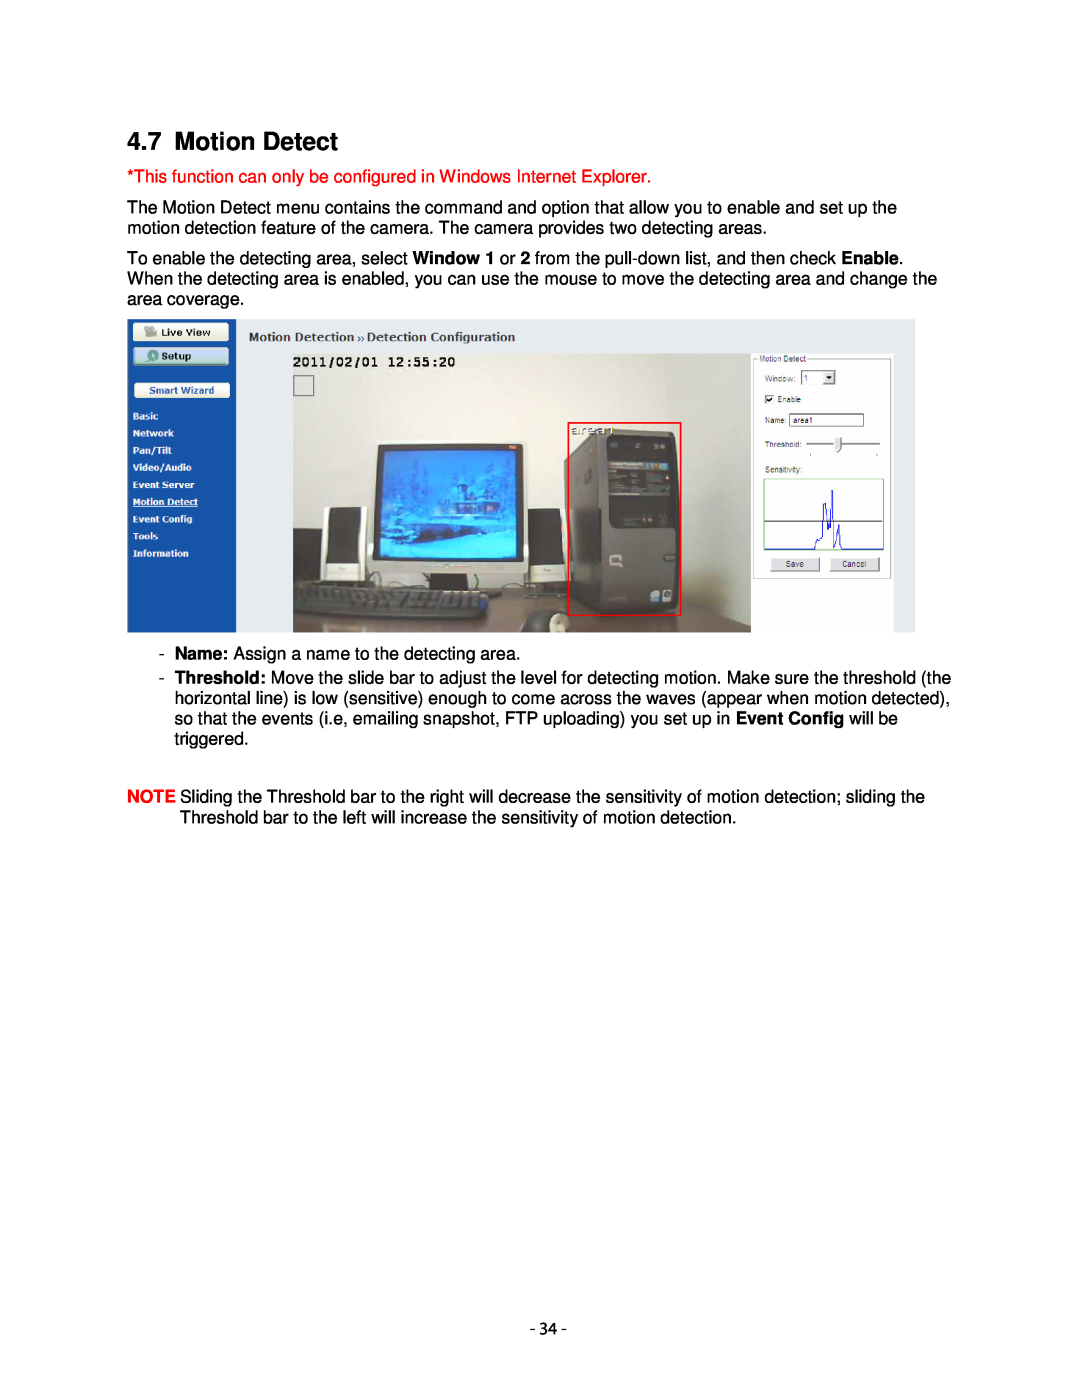 Airlink101 AICN1747W user manual Motion Detect, This function can only be configured in Windows Internet Explorer 